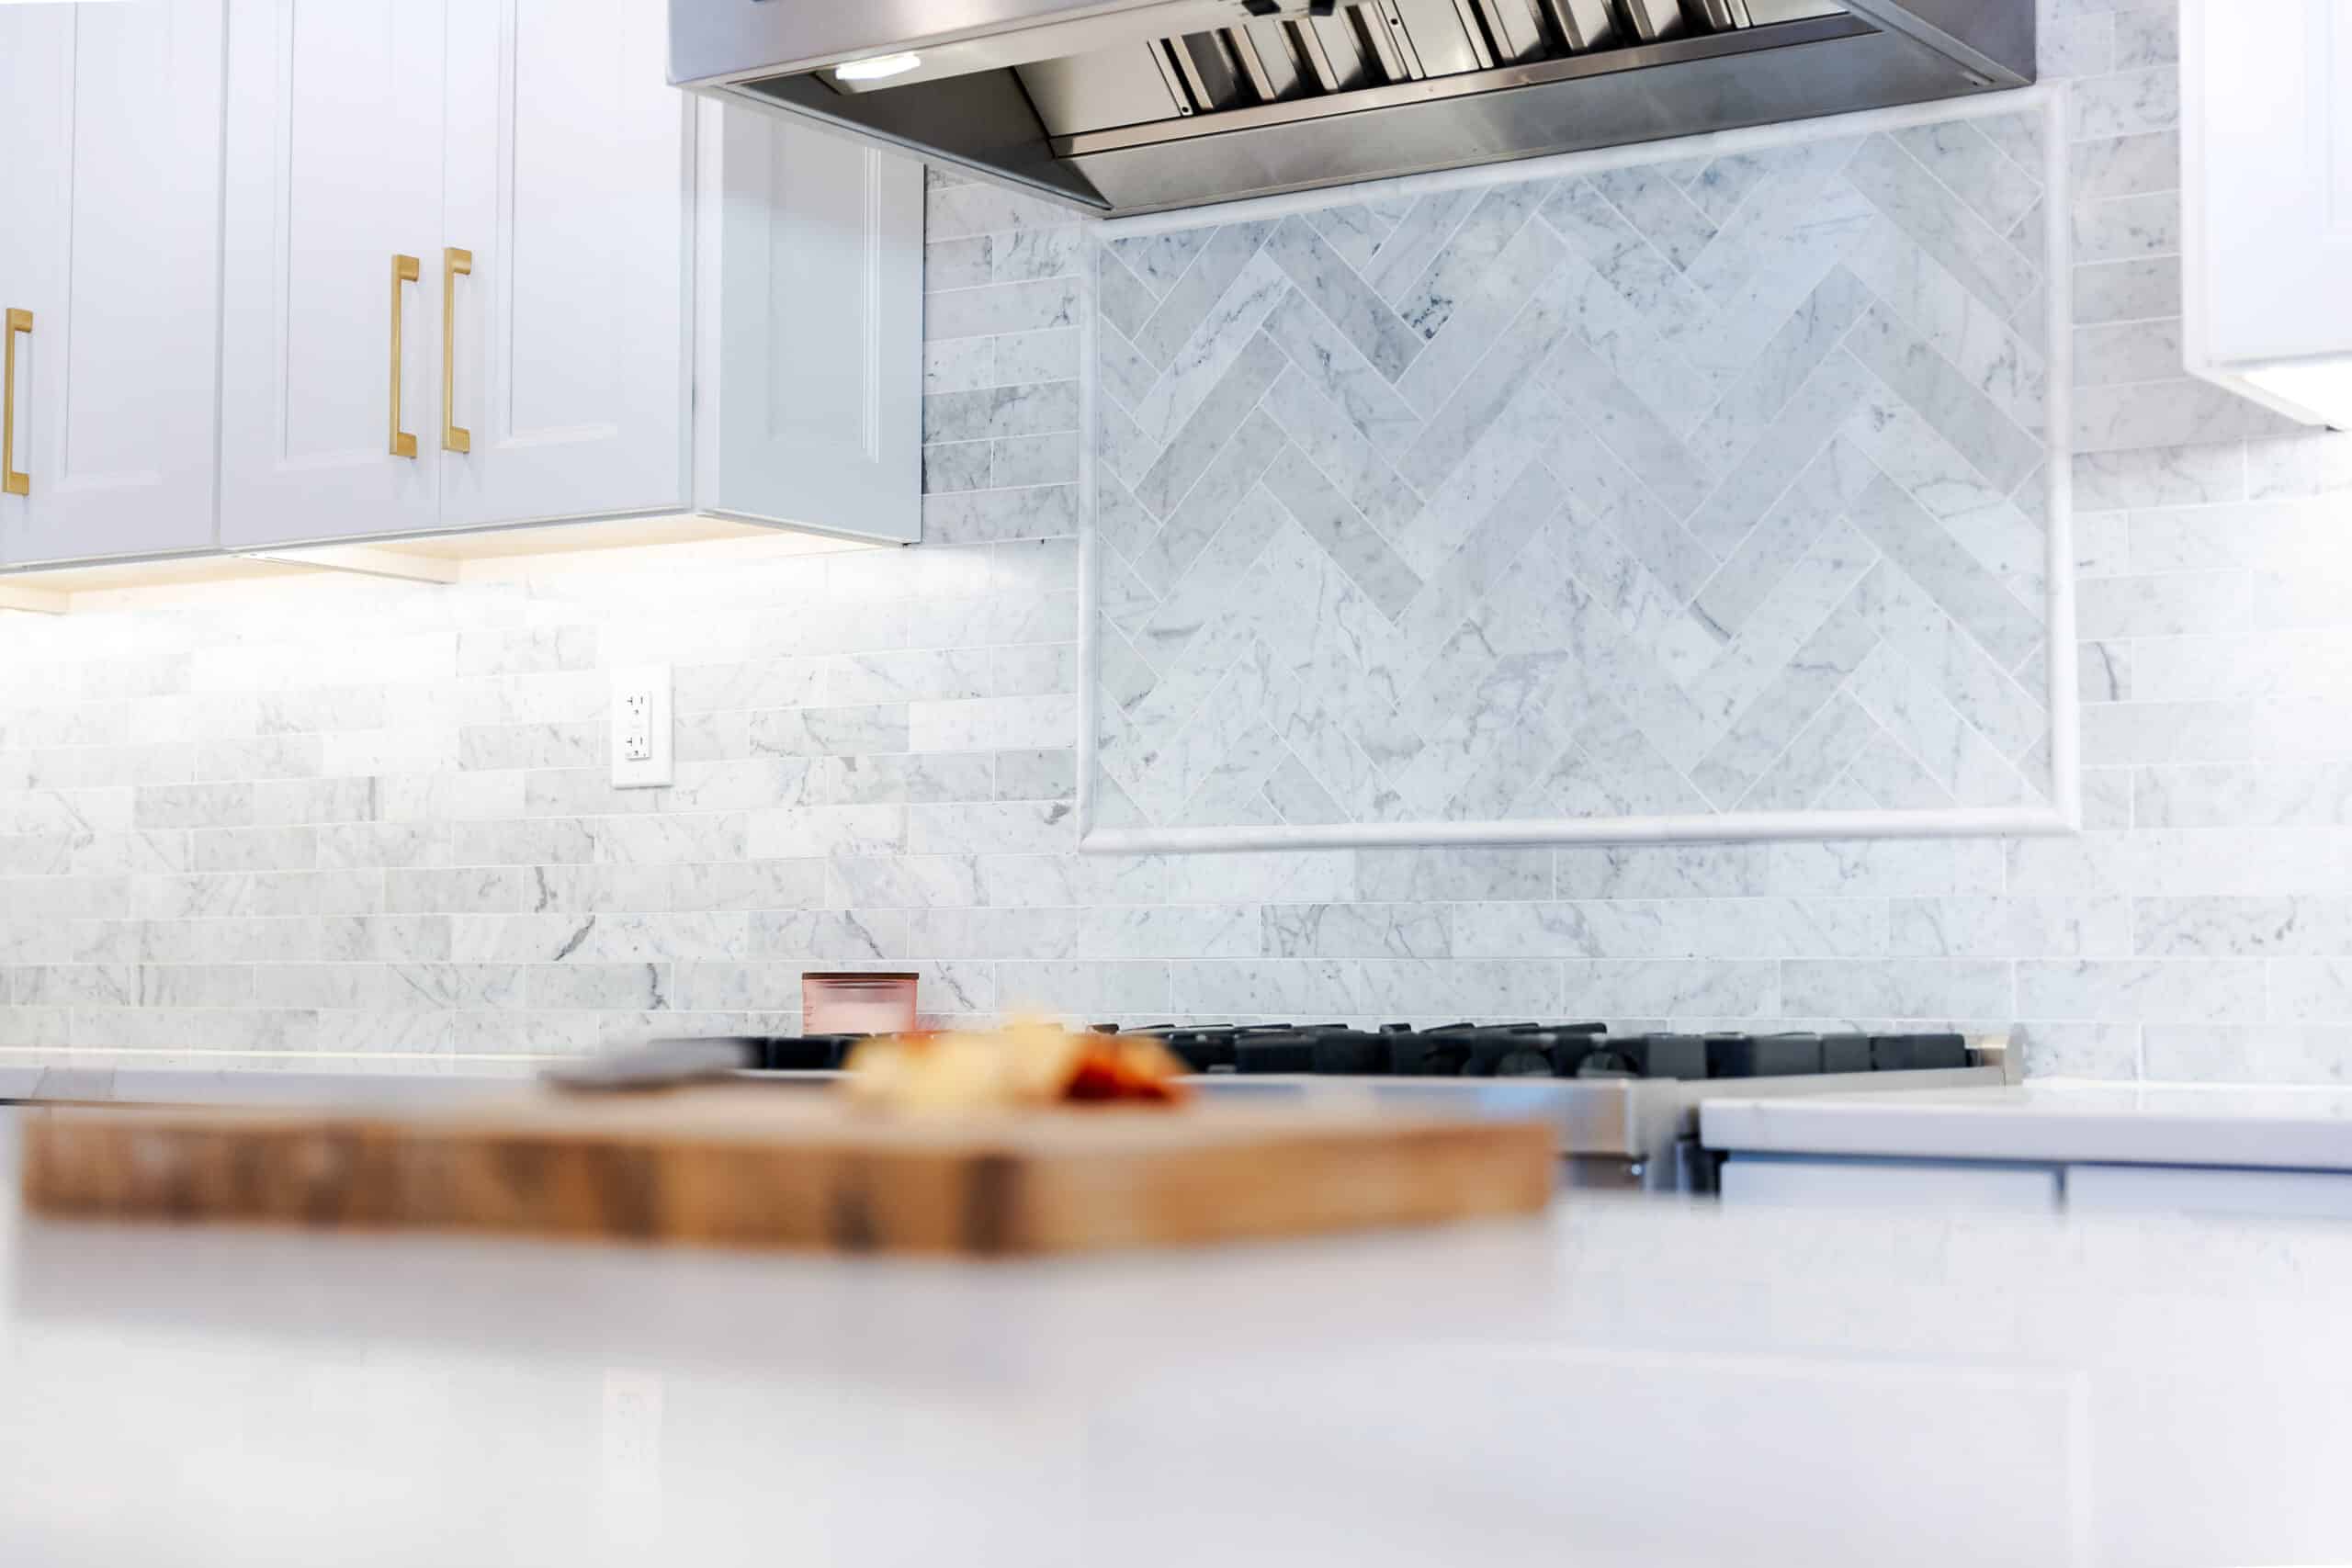 A kitchen with sleek white marble countertops and a modern stainless steel oven